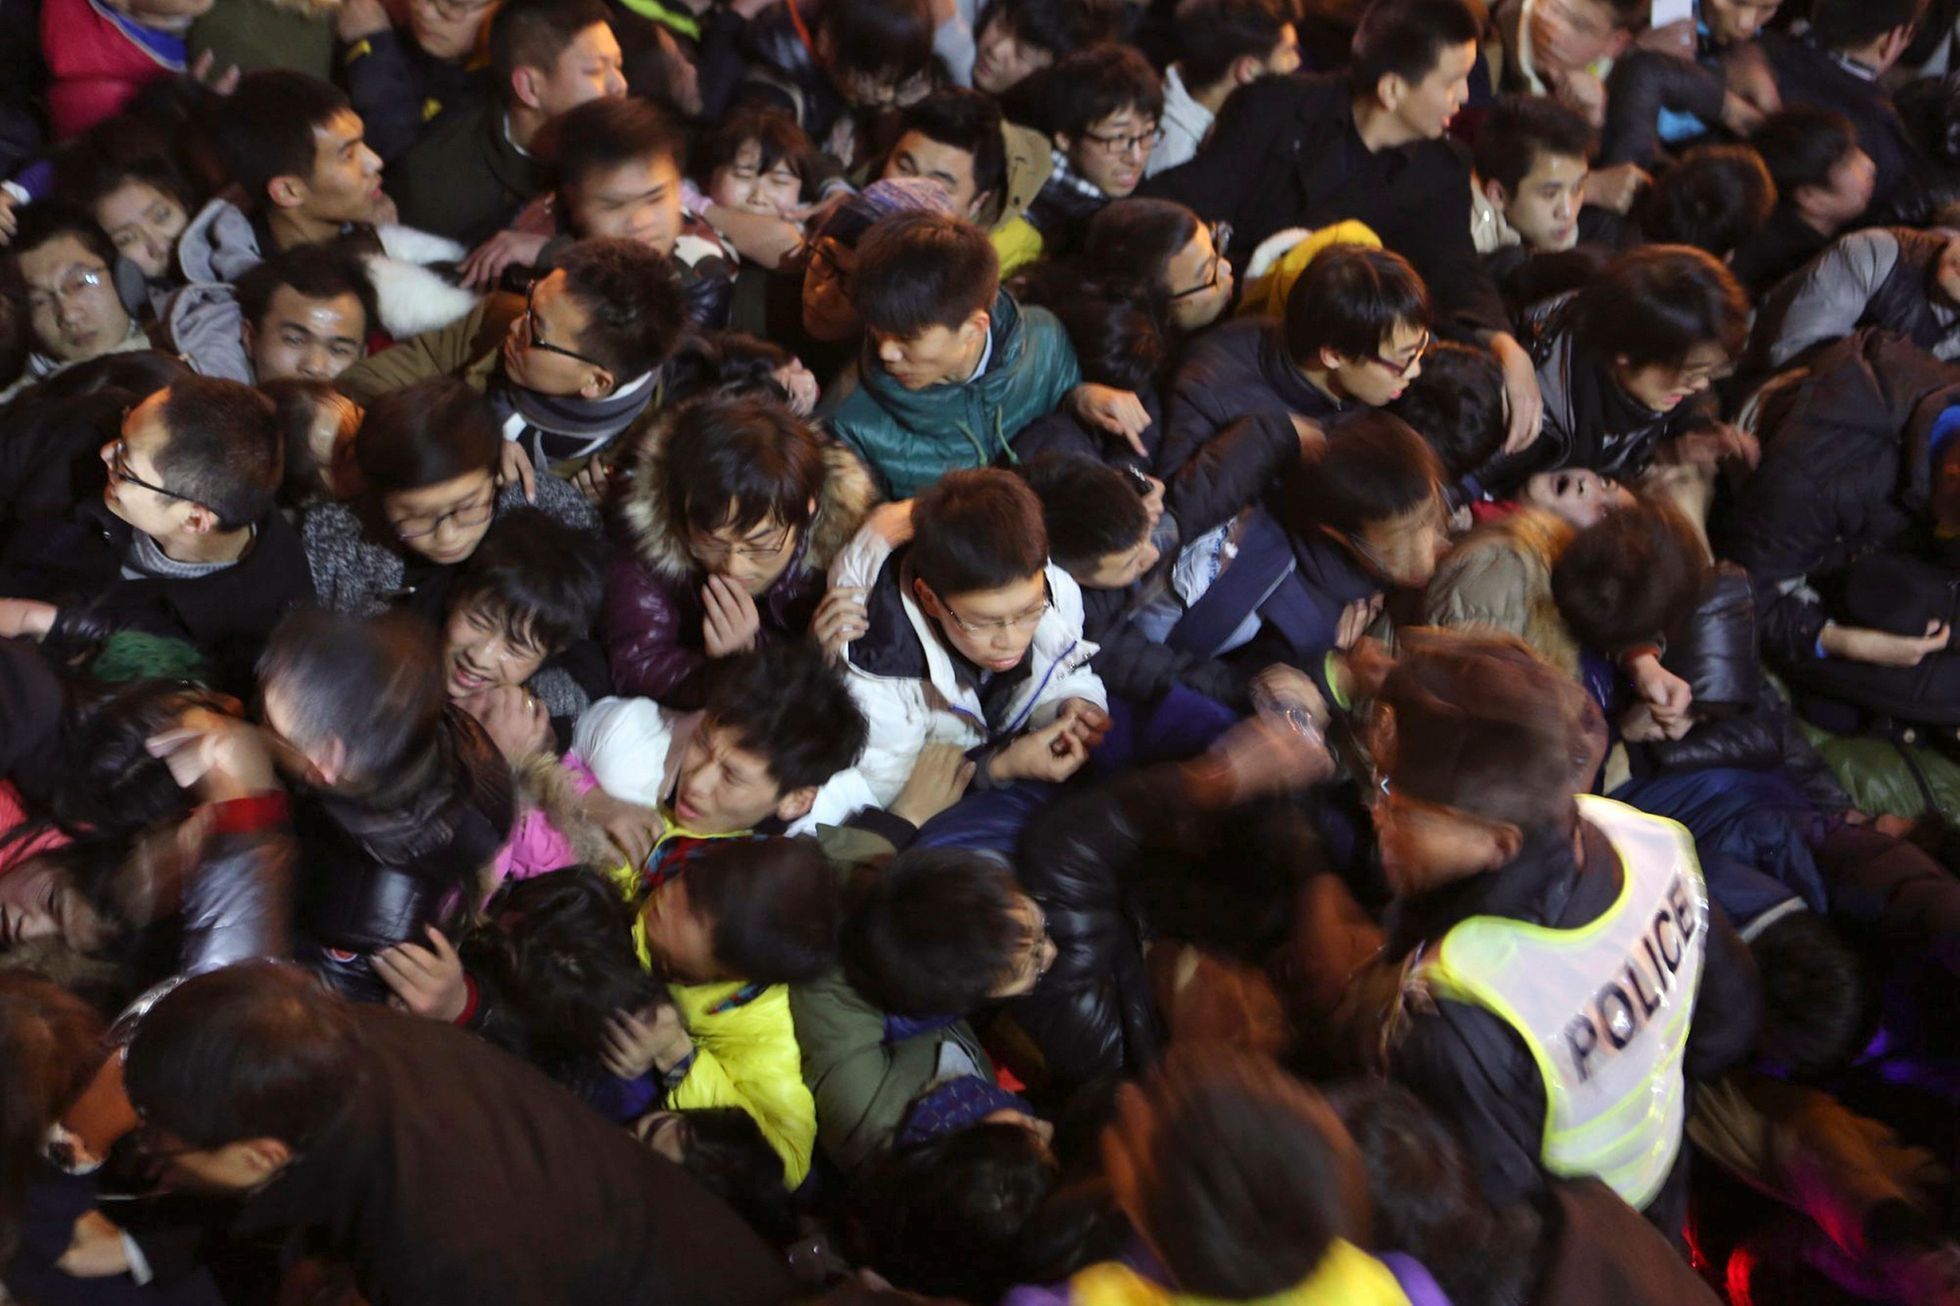 A view of a stampede is seen during the New Year's celebration on the Bund, a waterfront area in central Shanghai